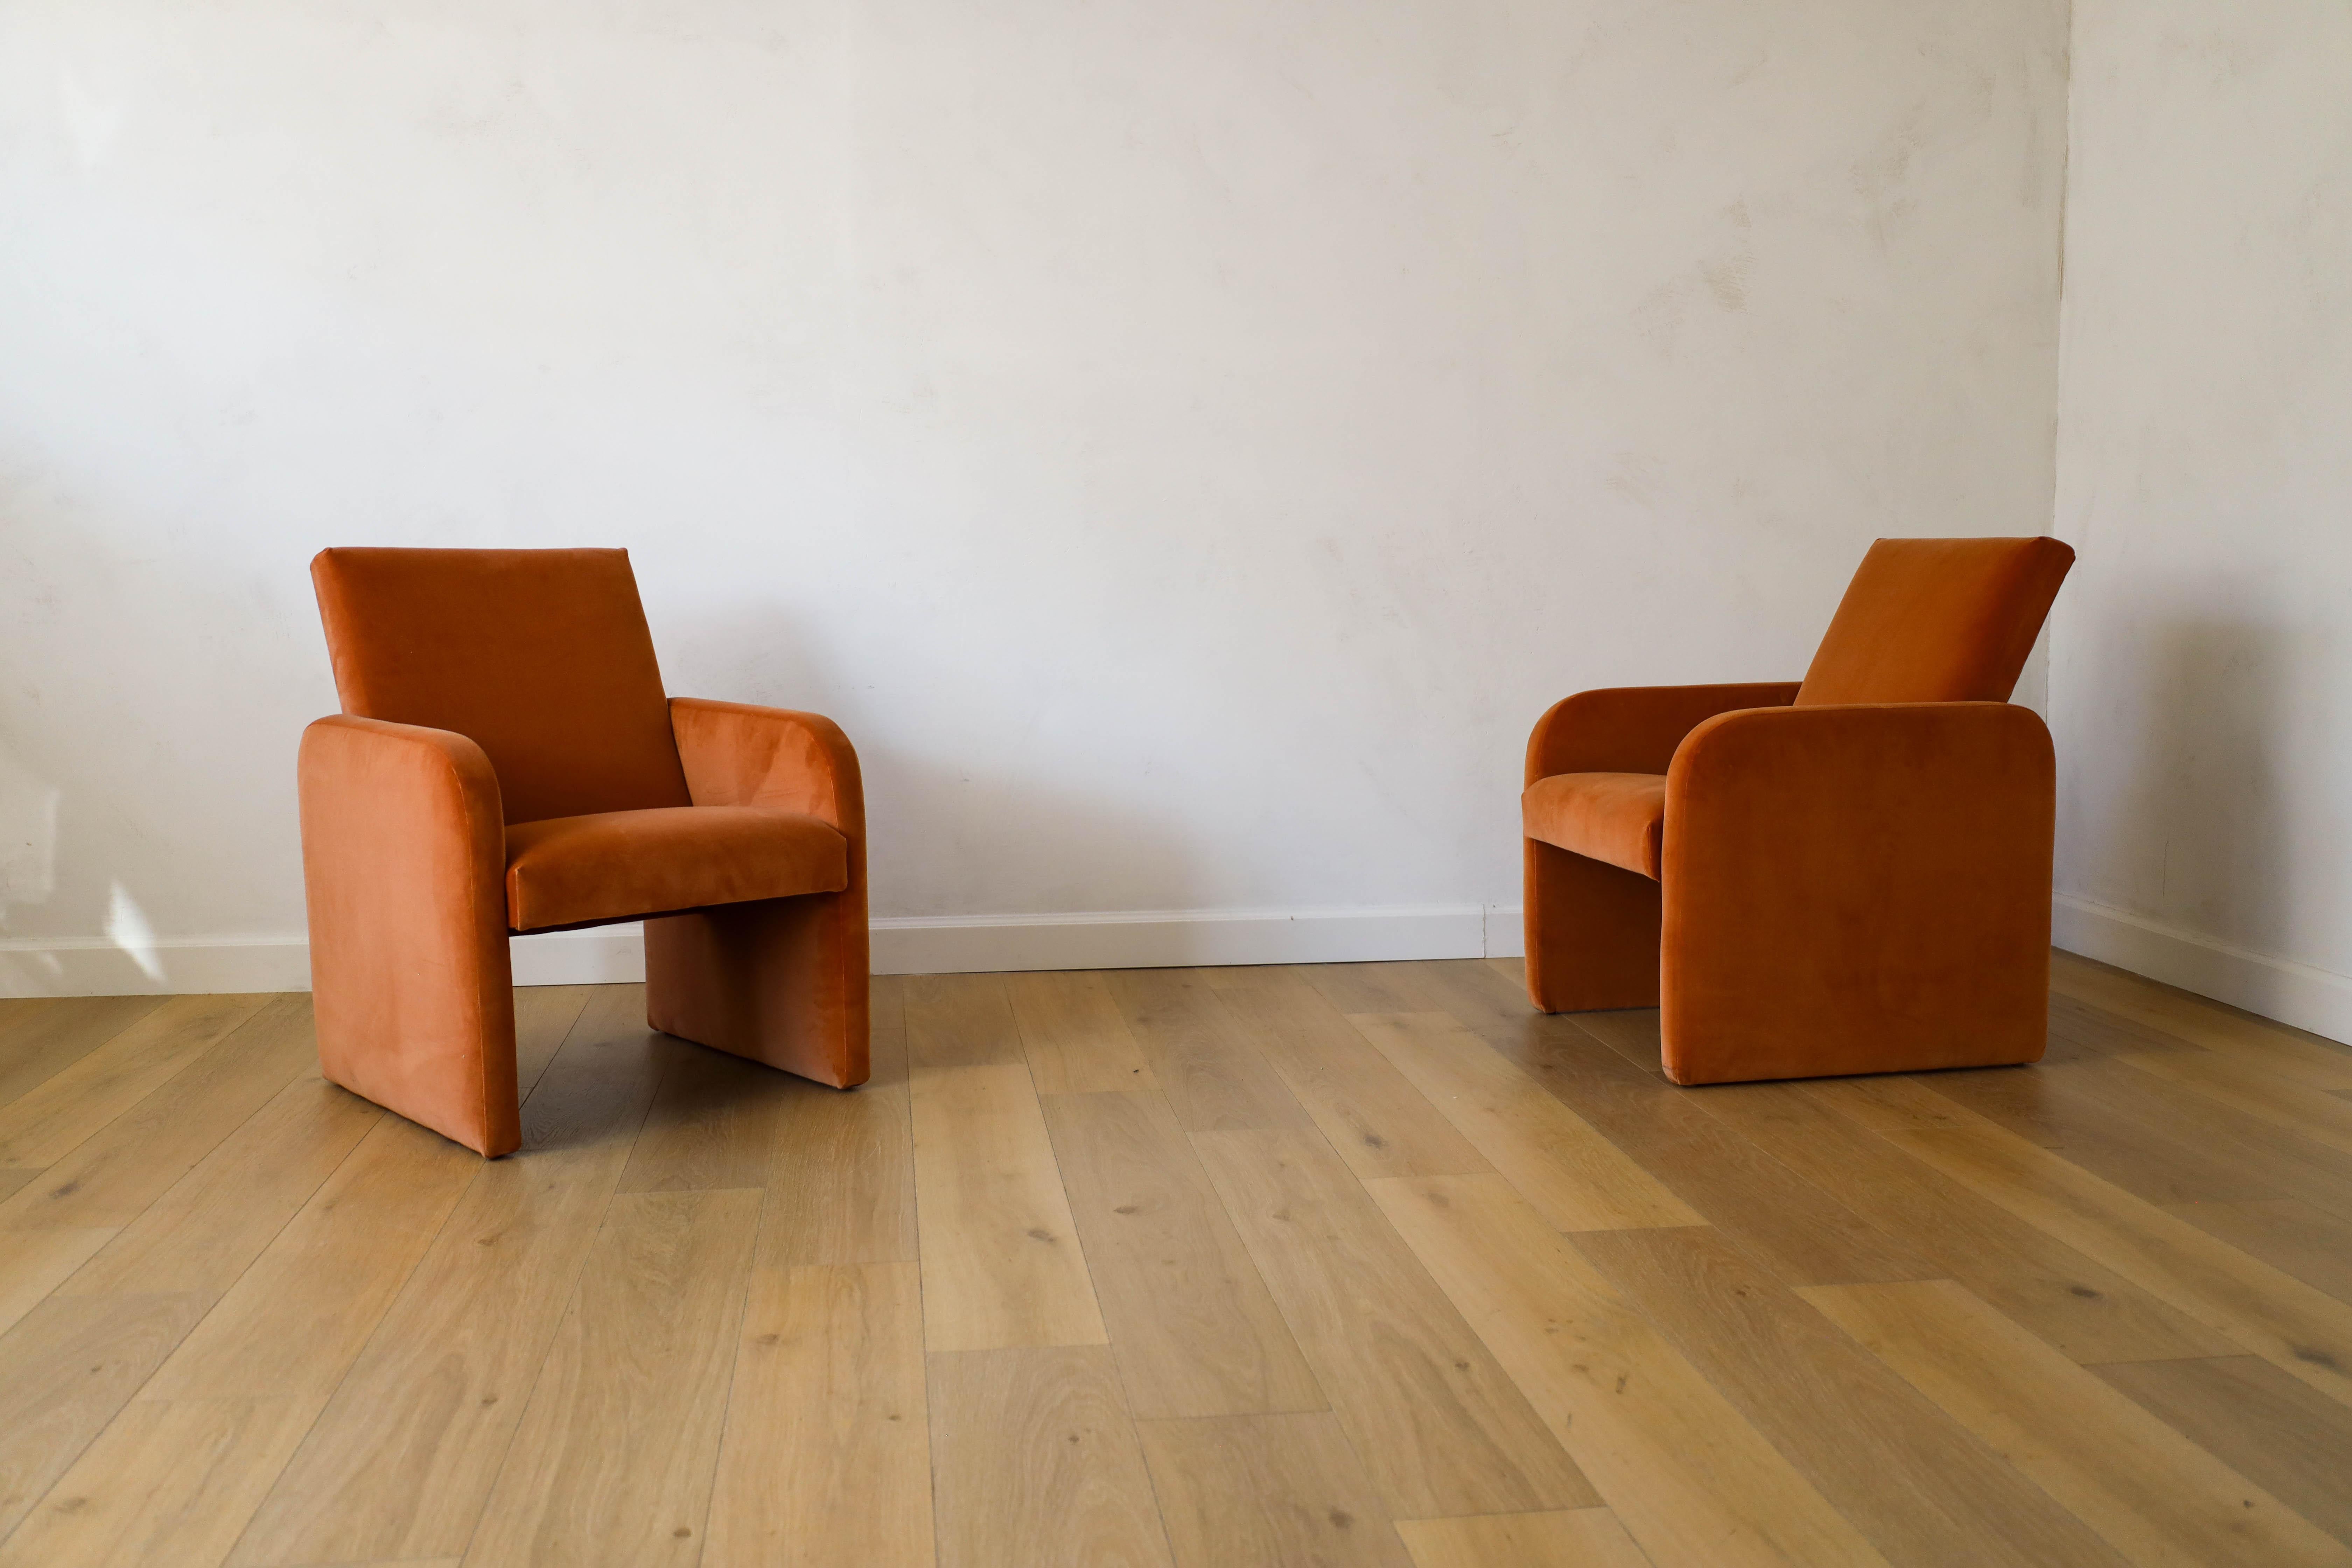 Stunning set of postmodern chairs originating from a boutique hotel in Prague, 1970s. The pair has been reimagined in a beautiful velvet upholstery, offering pink and orange tones varying on the warmth of the room. Give your room the perfect pop of